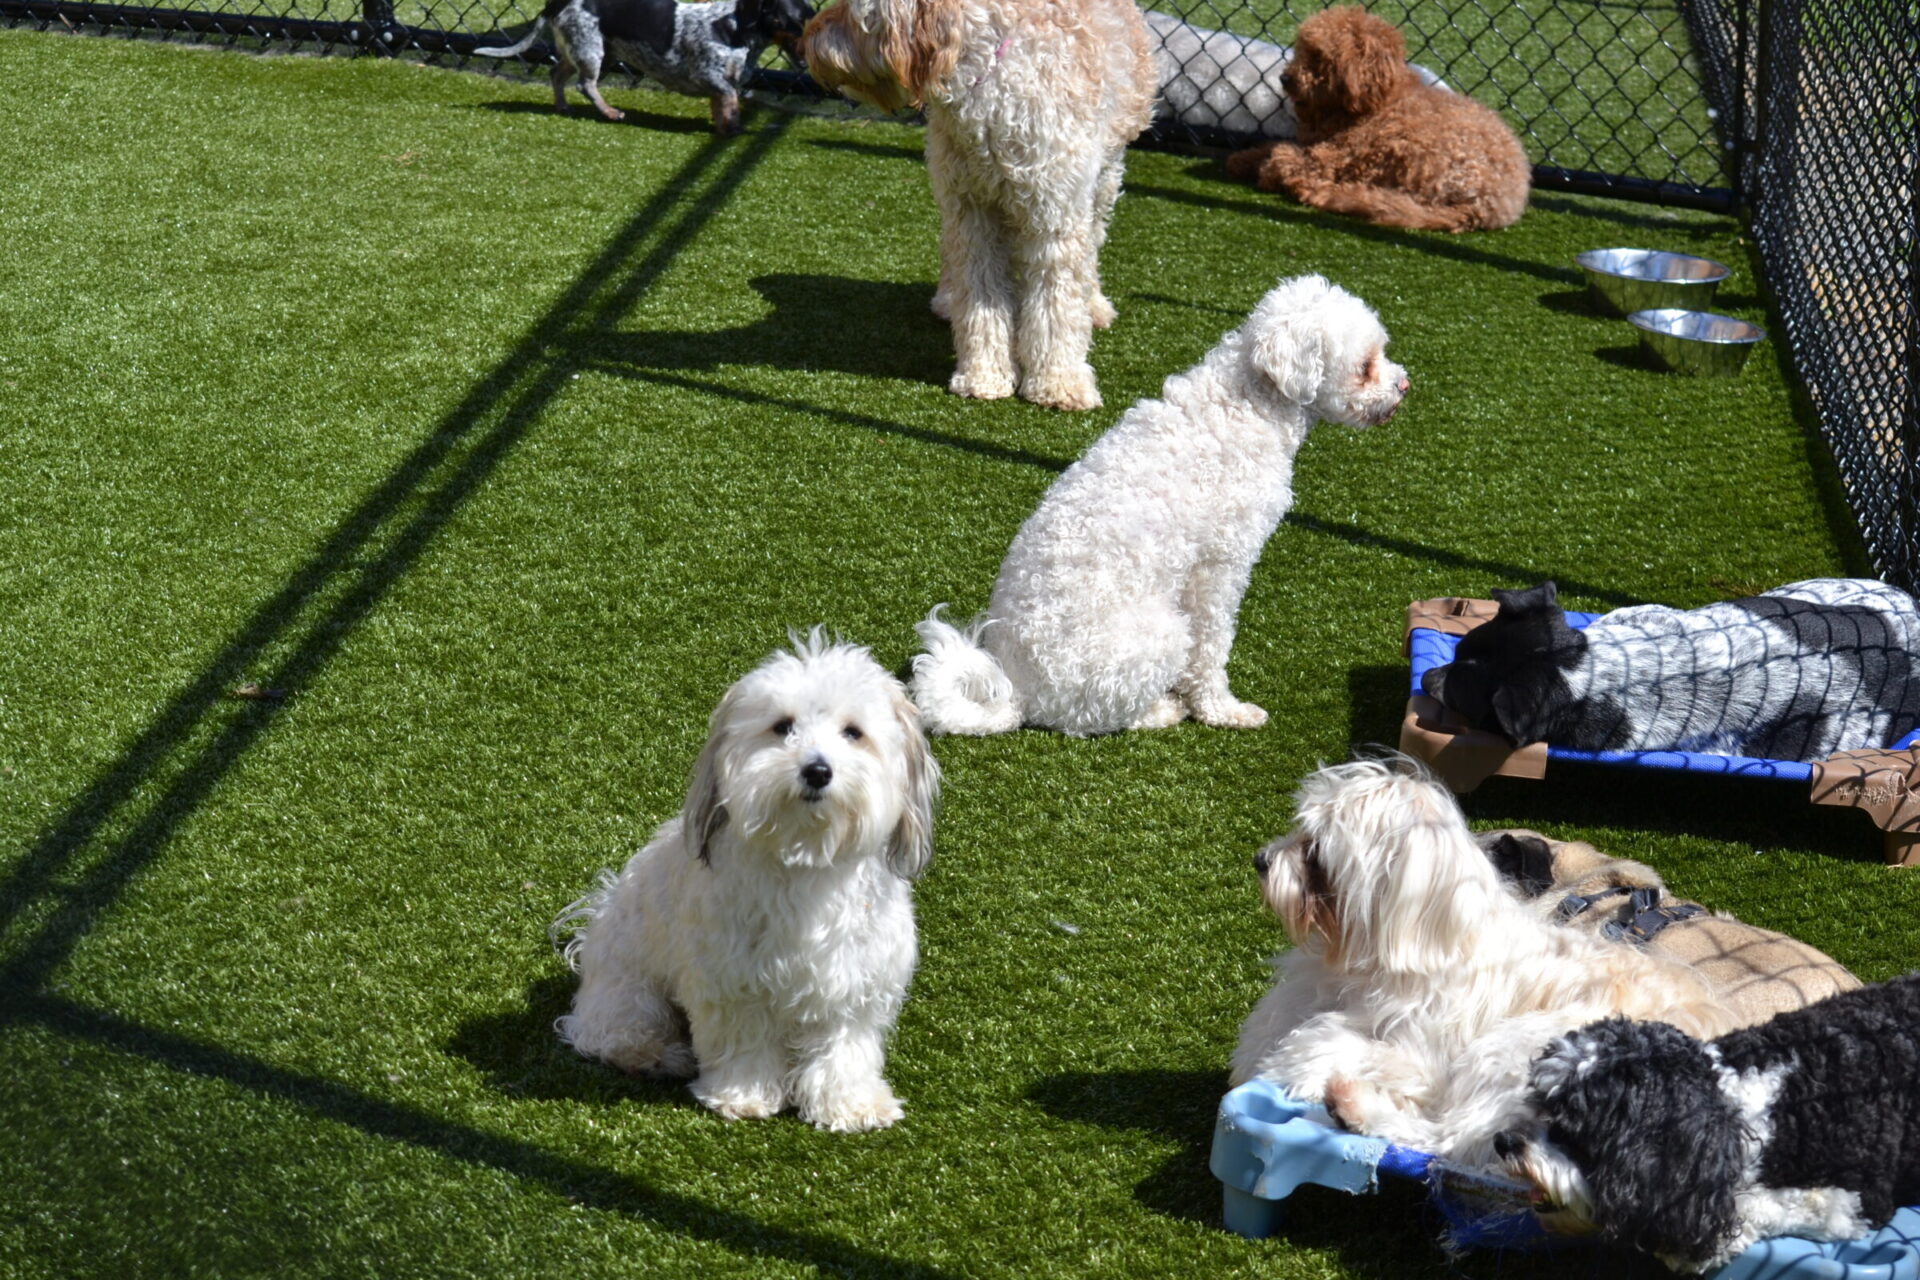 Several dogs of various breeds lounging and playing on synthetic grass in a sunny, fenced outdoor area with water bowls and a bed.